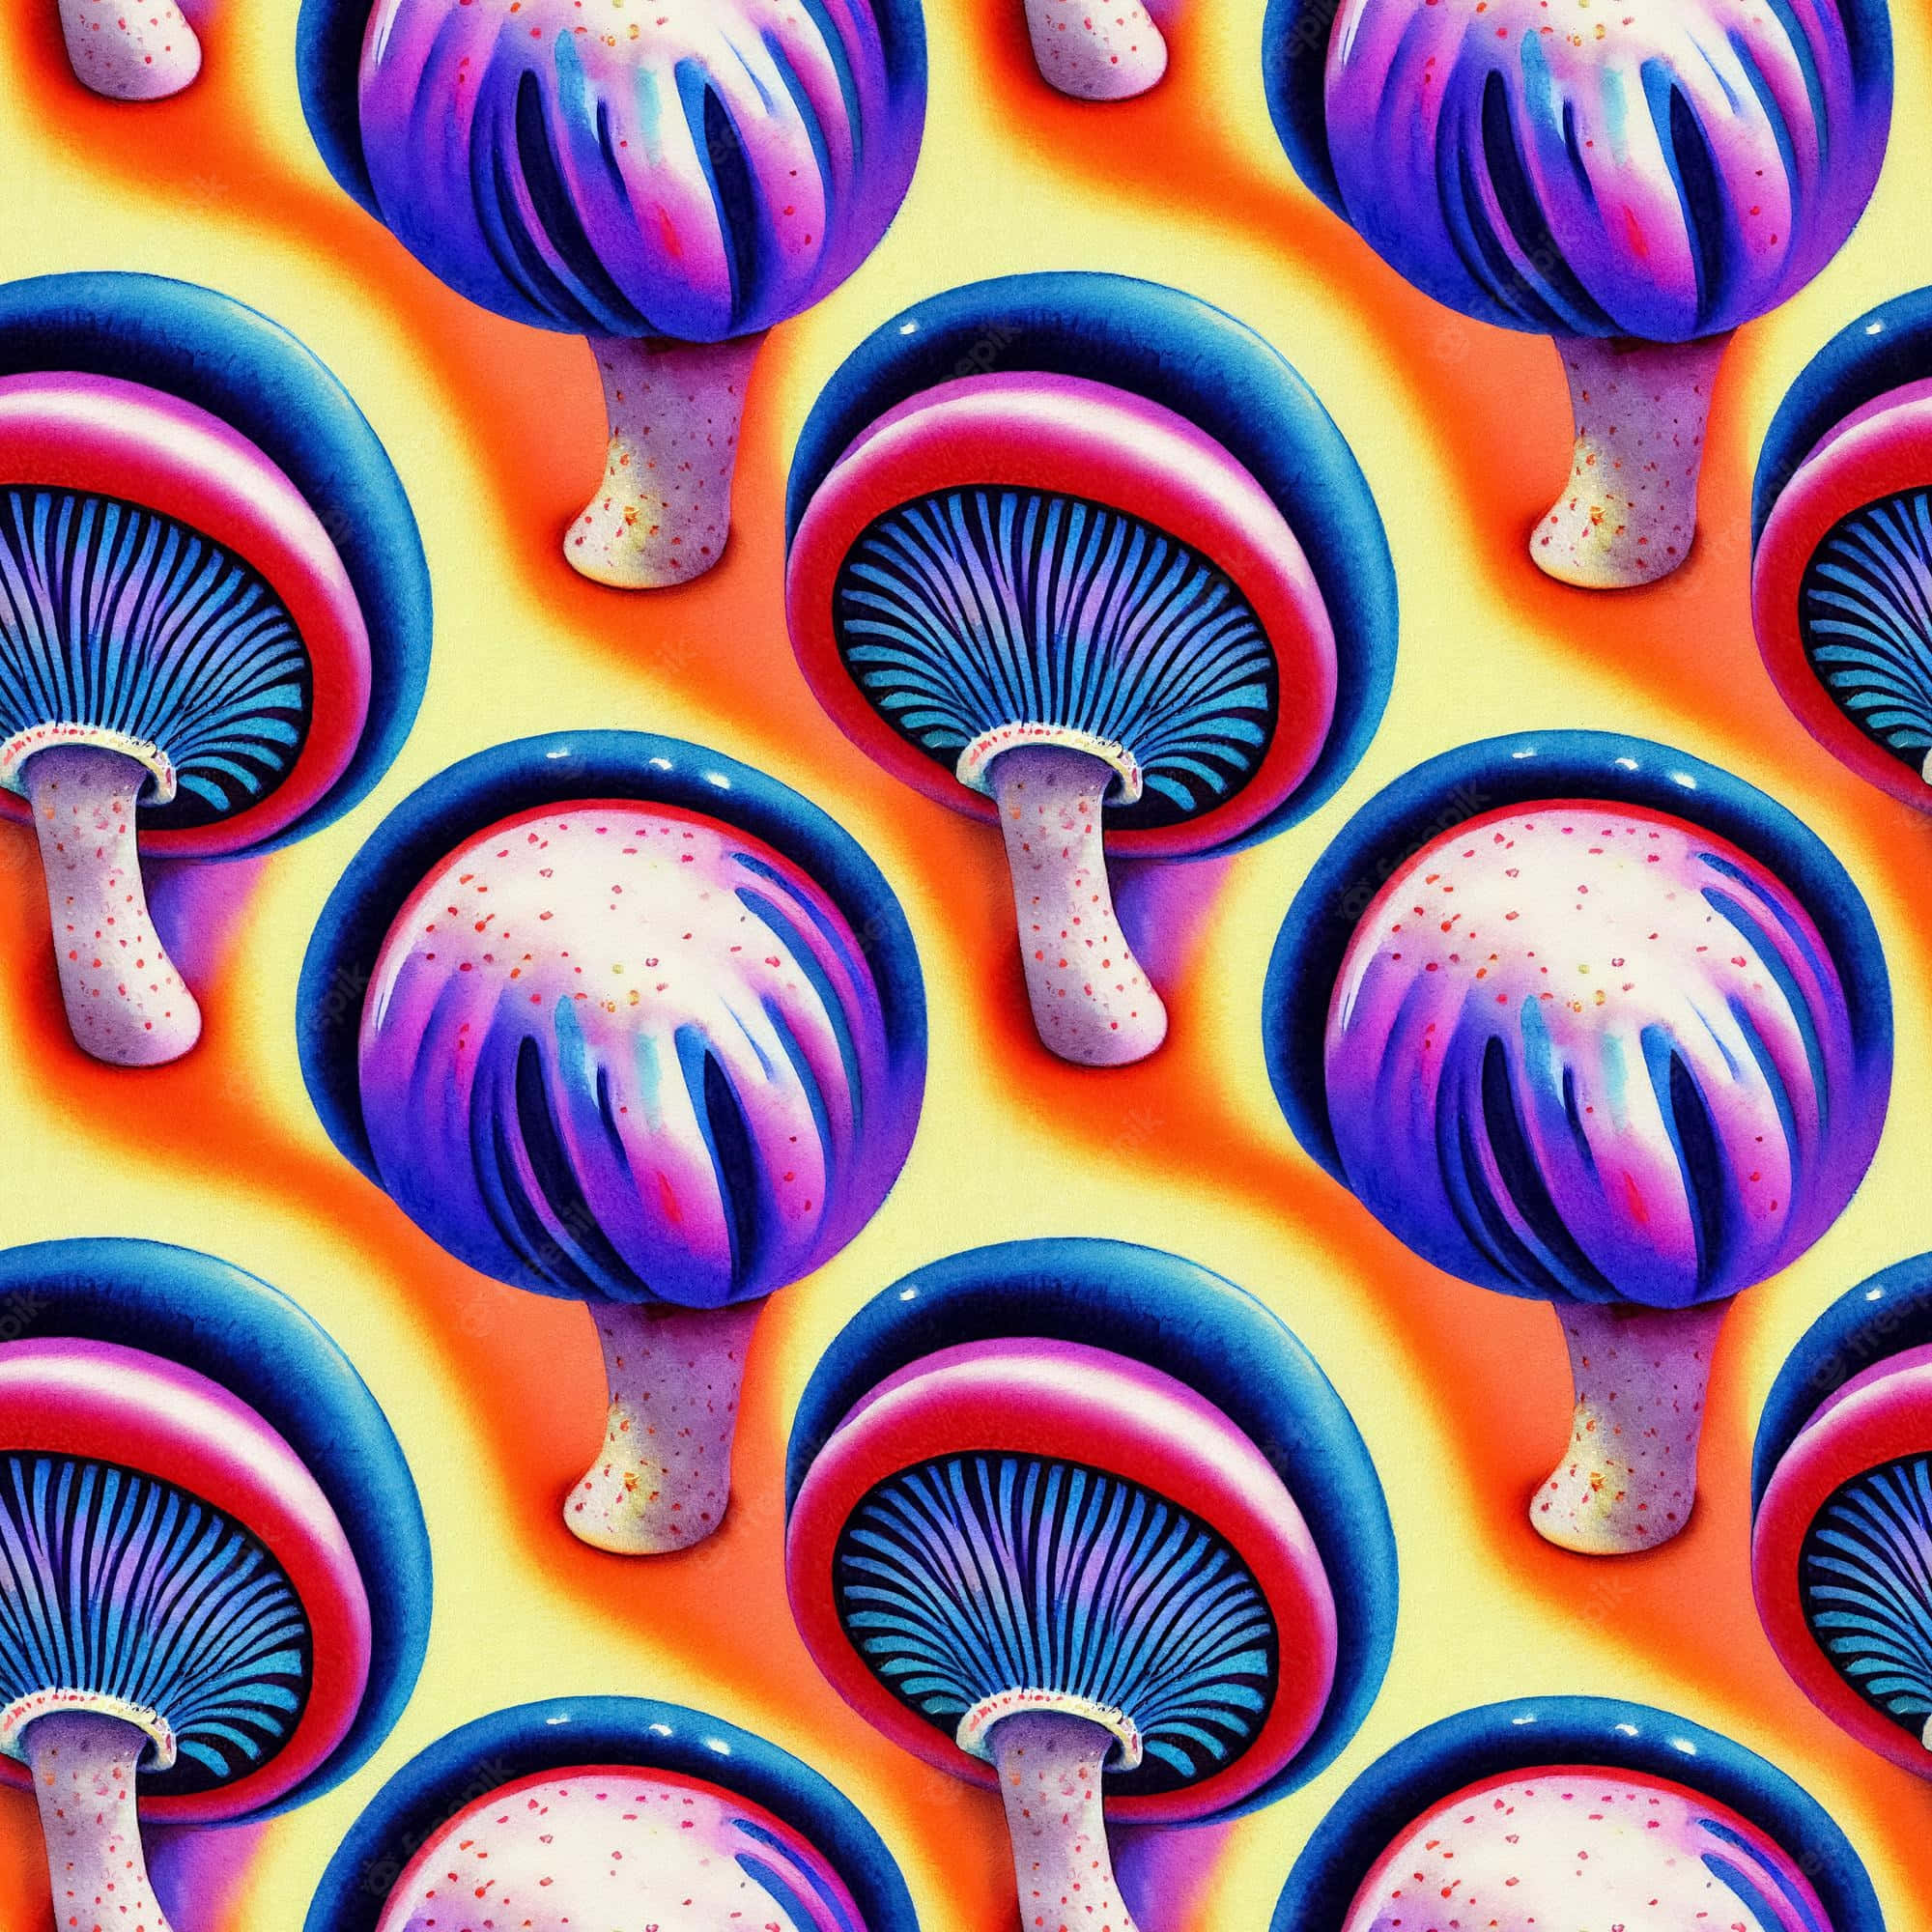 A vibrantly-colored mushroom with psychedelic hues Wallpaper